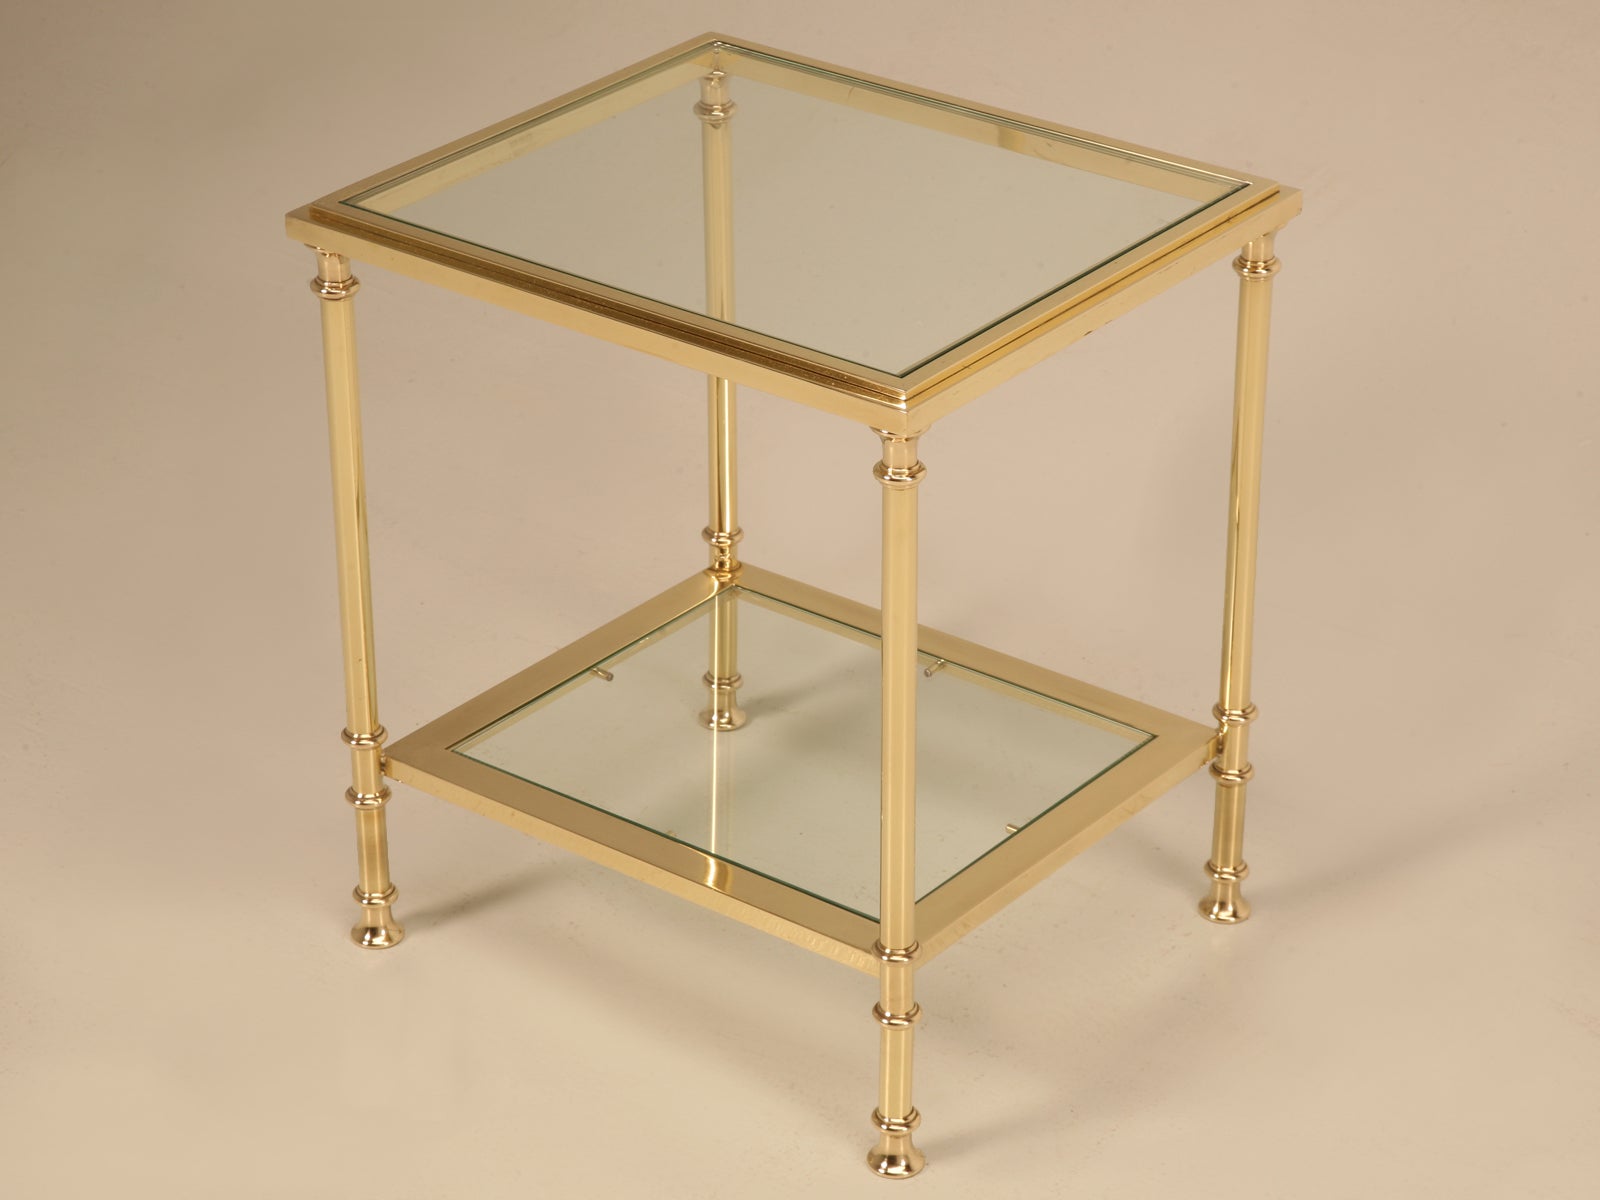 Glamorous Vintage French Solid Brass & Glass Two Tier End or Side Table